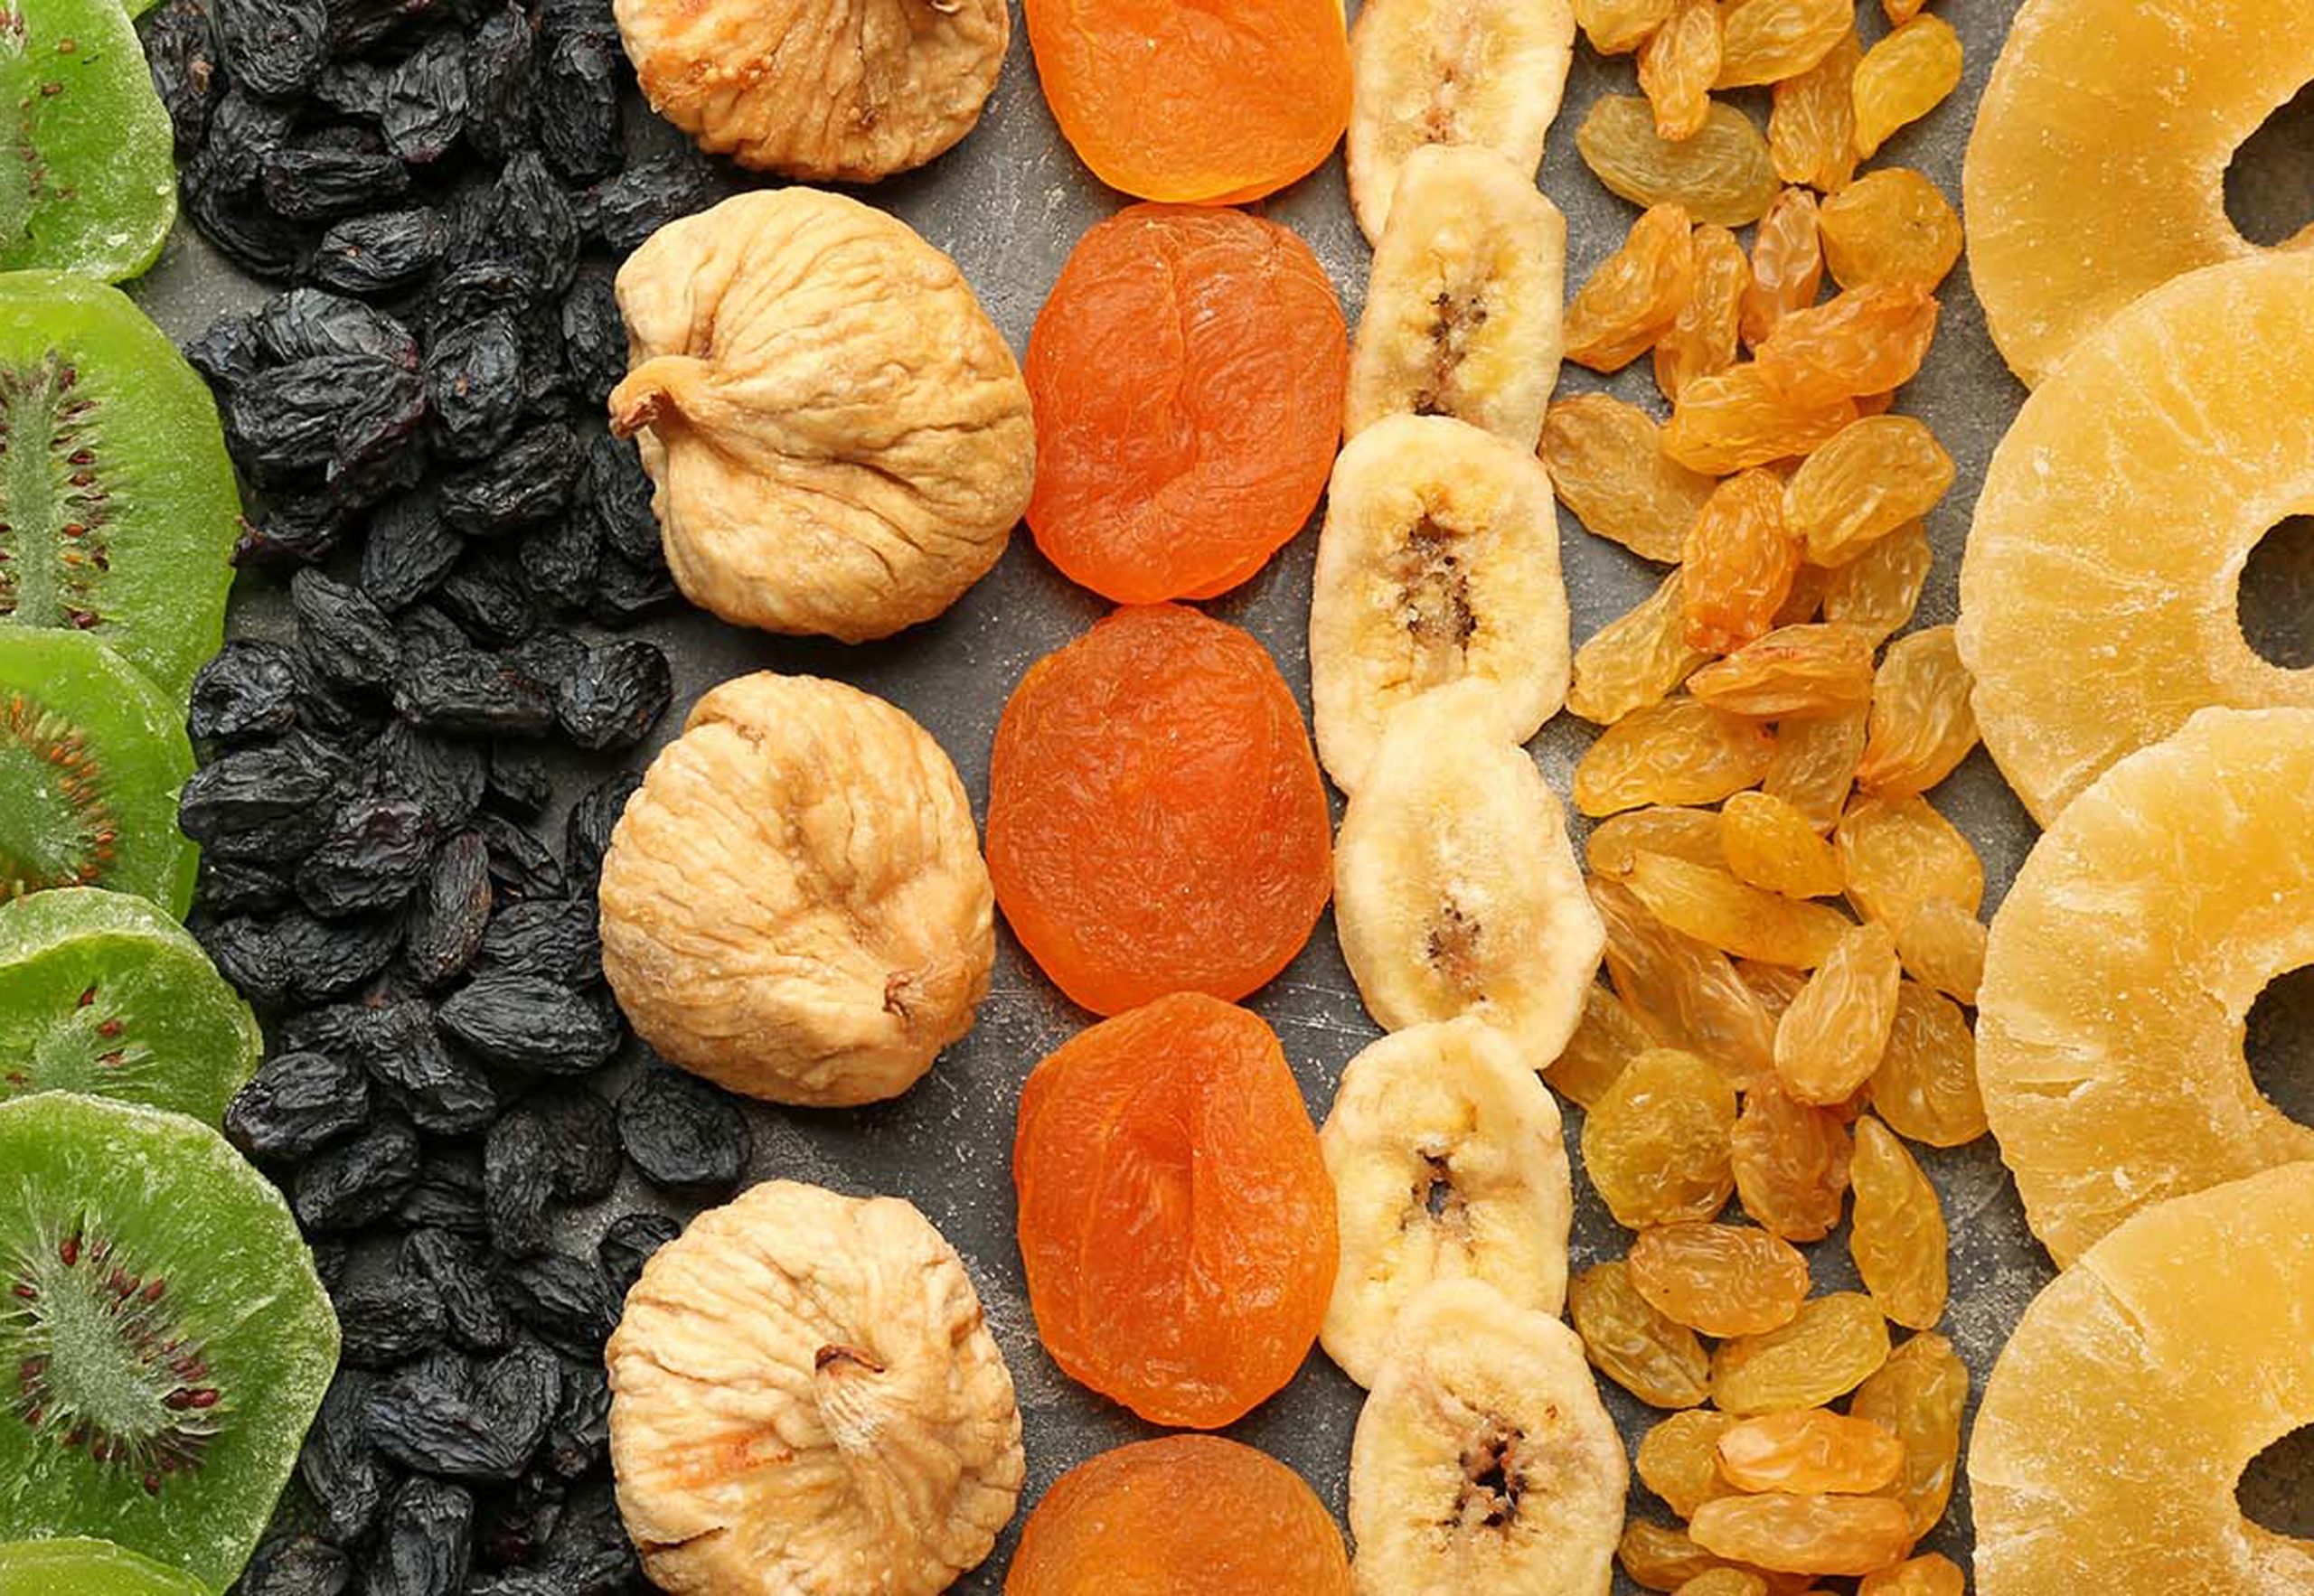 Health benefits of dried fruits - Nutex